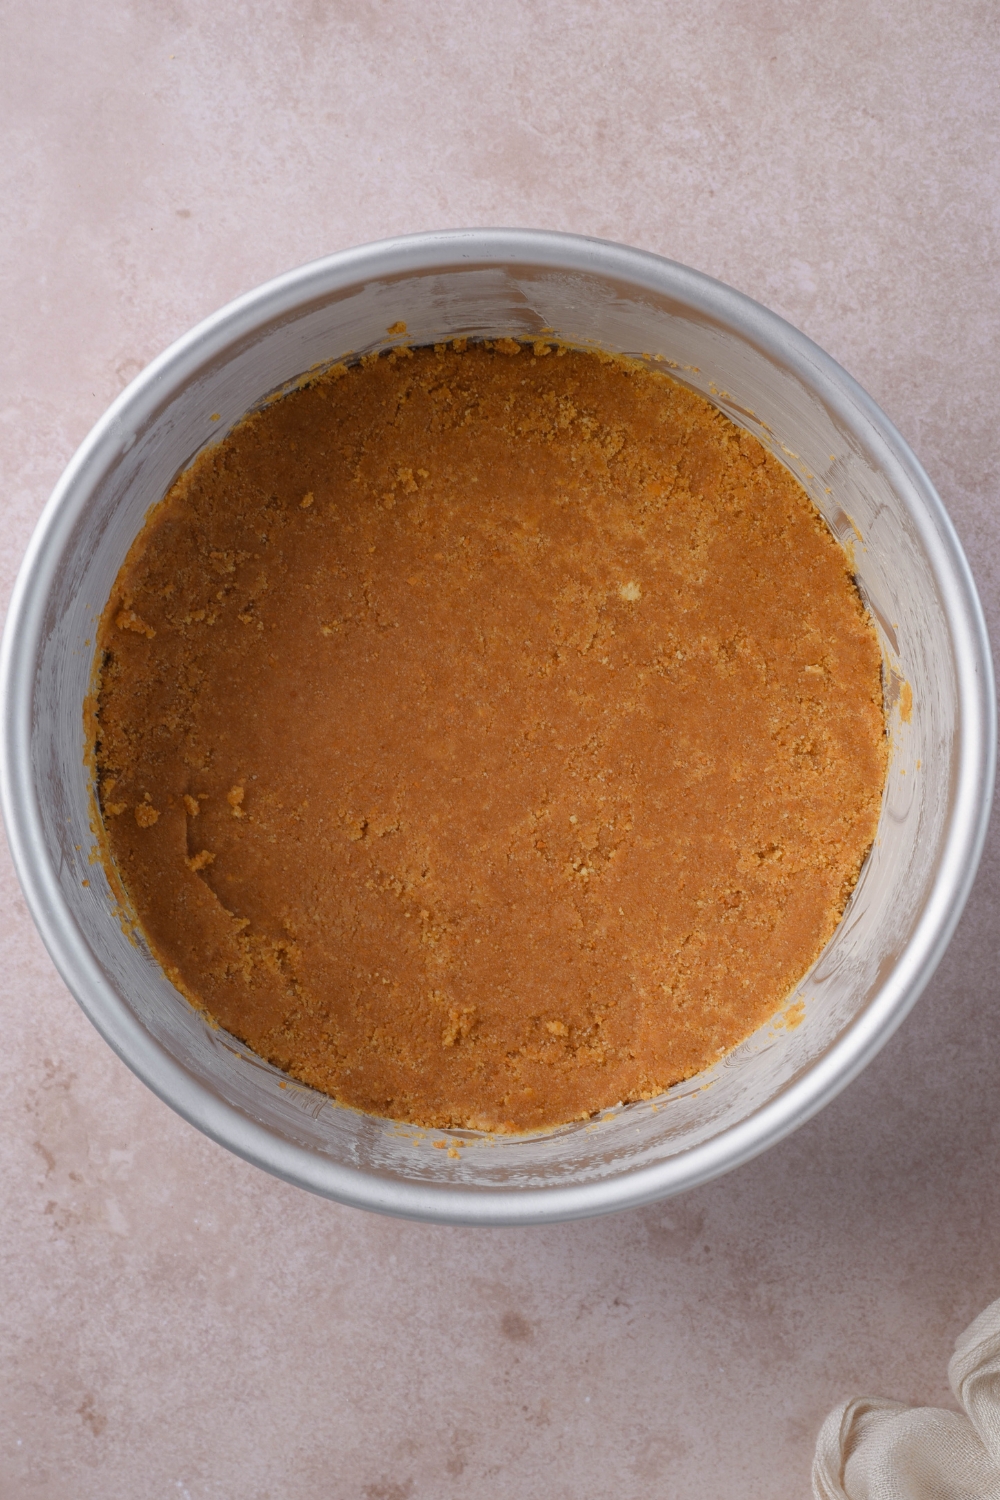 A springform pan with graham cracker crust on the bottom.